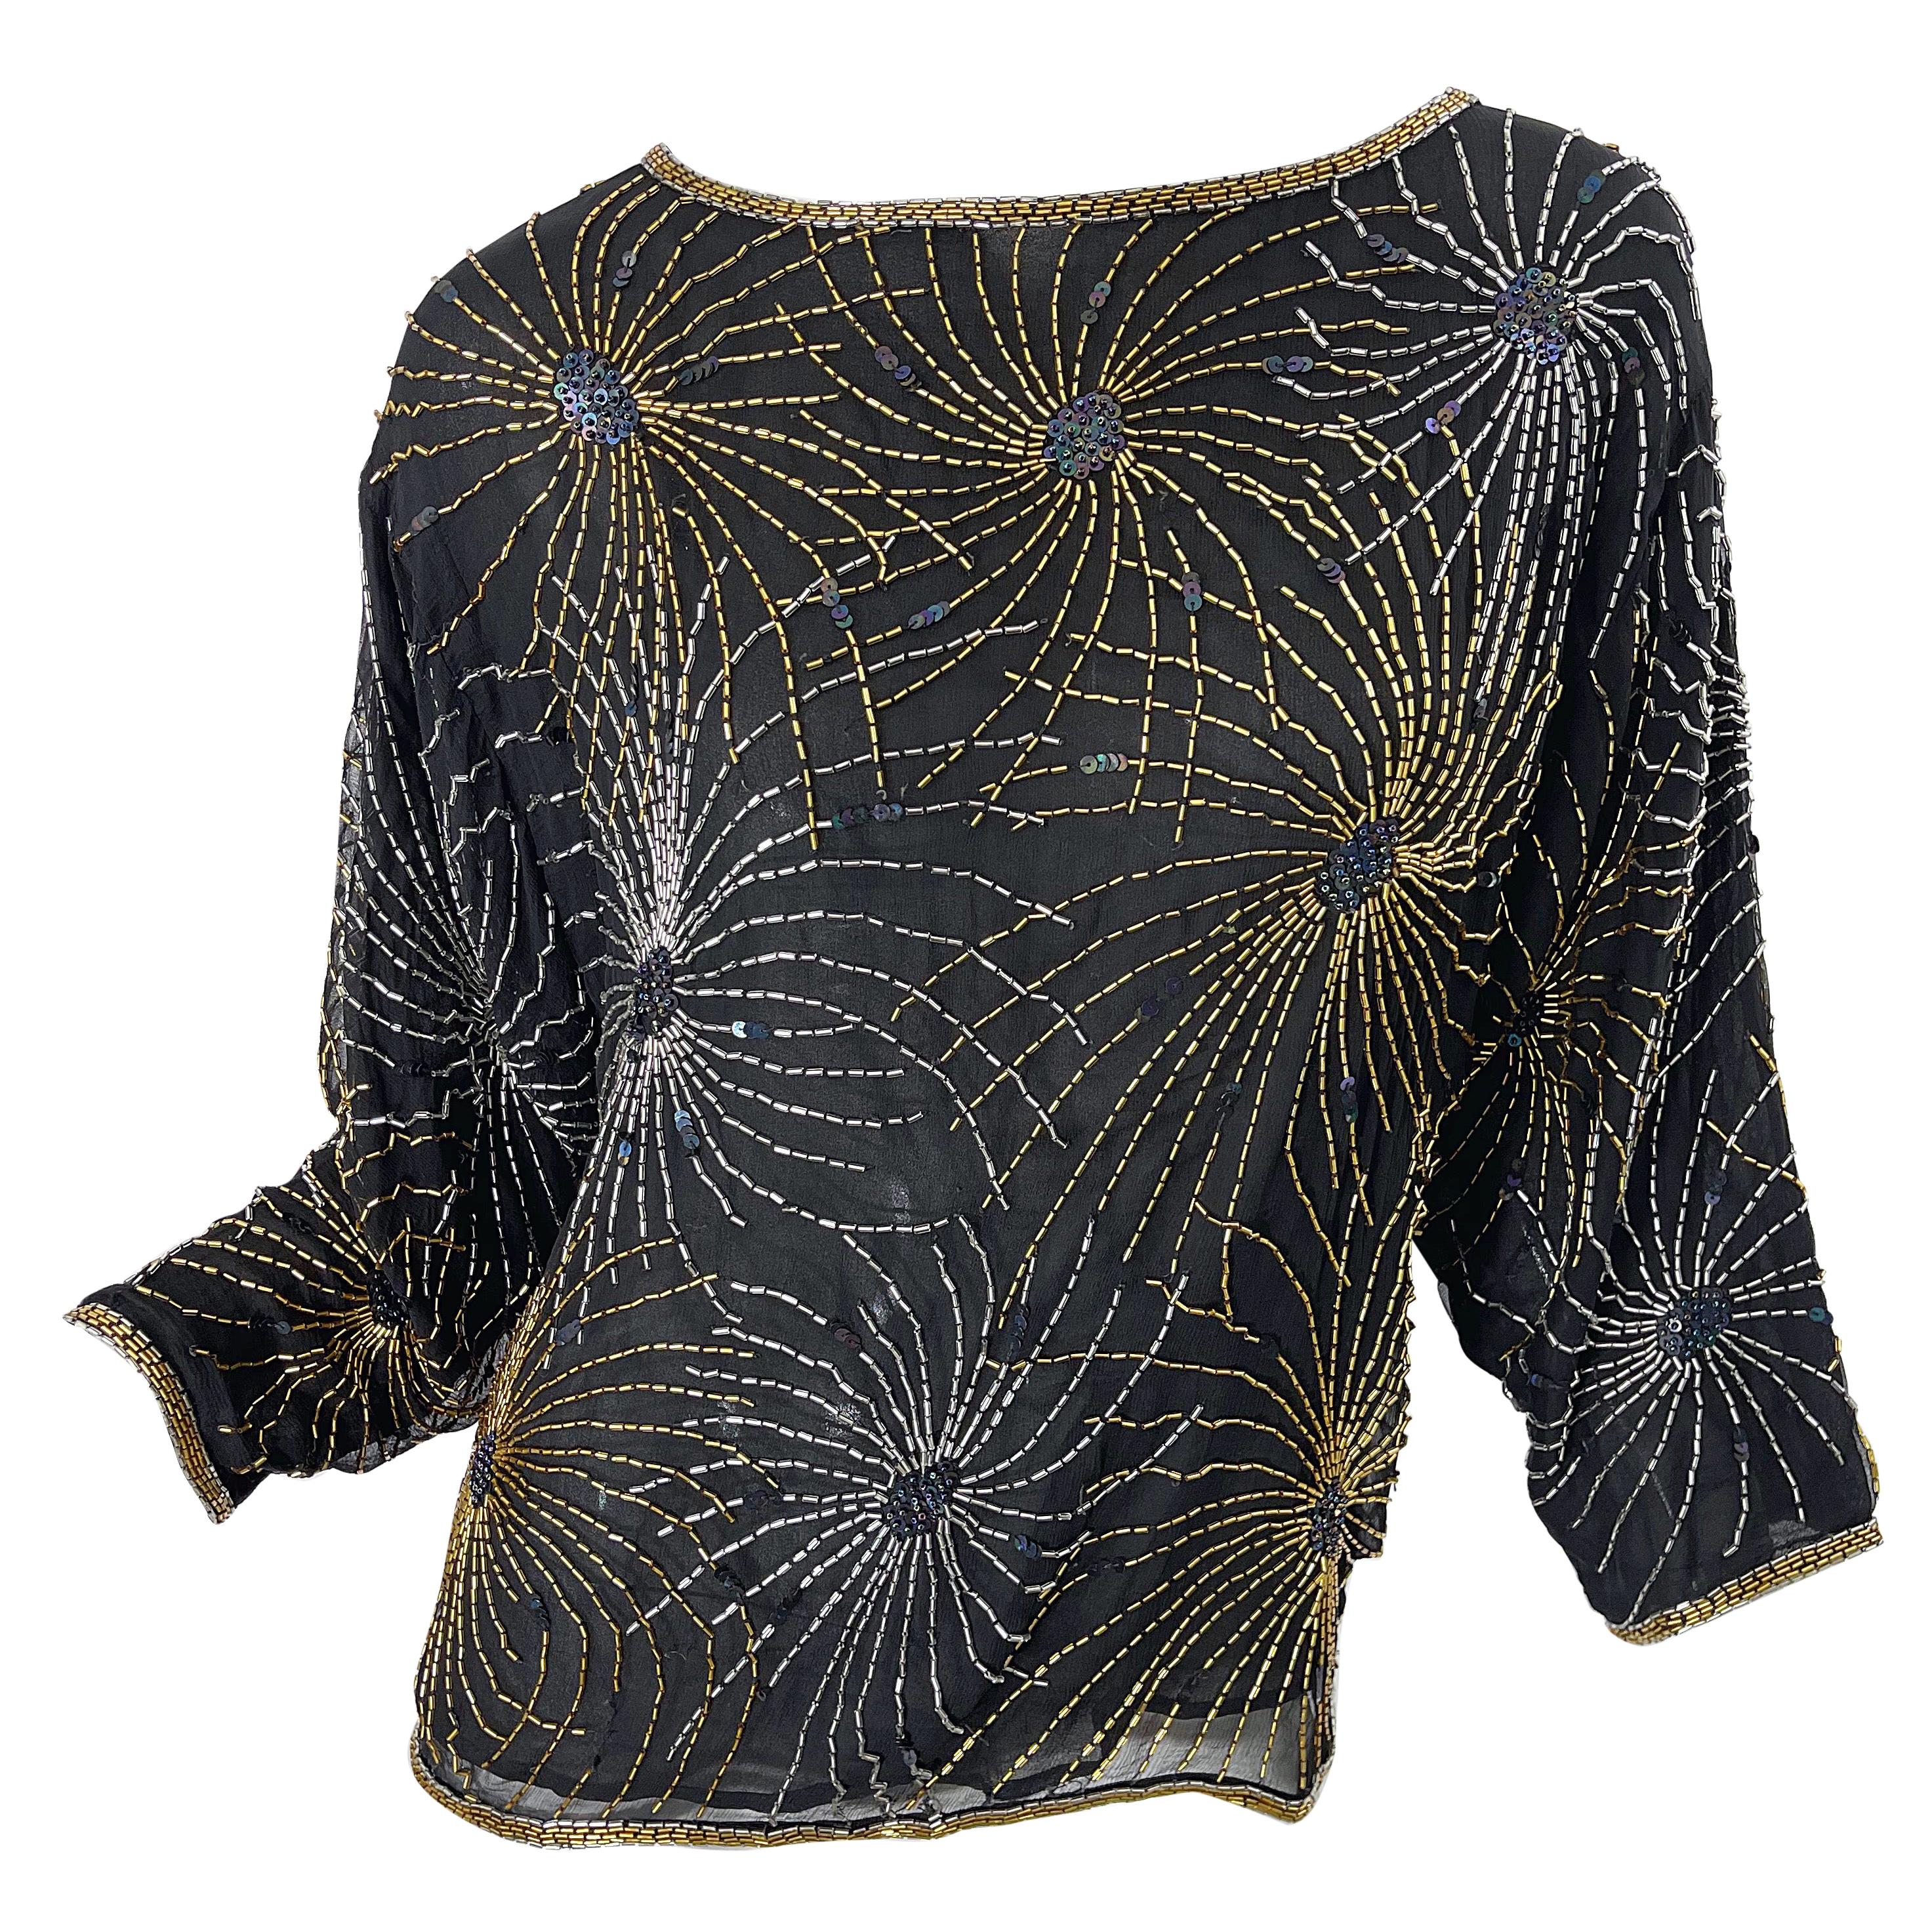 Halston 1970s Iconic Fireworks Beaded Black Silk Chiffon Vintage 70s Blouse Top For Sale